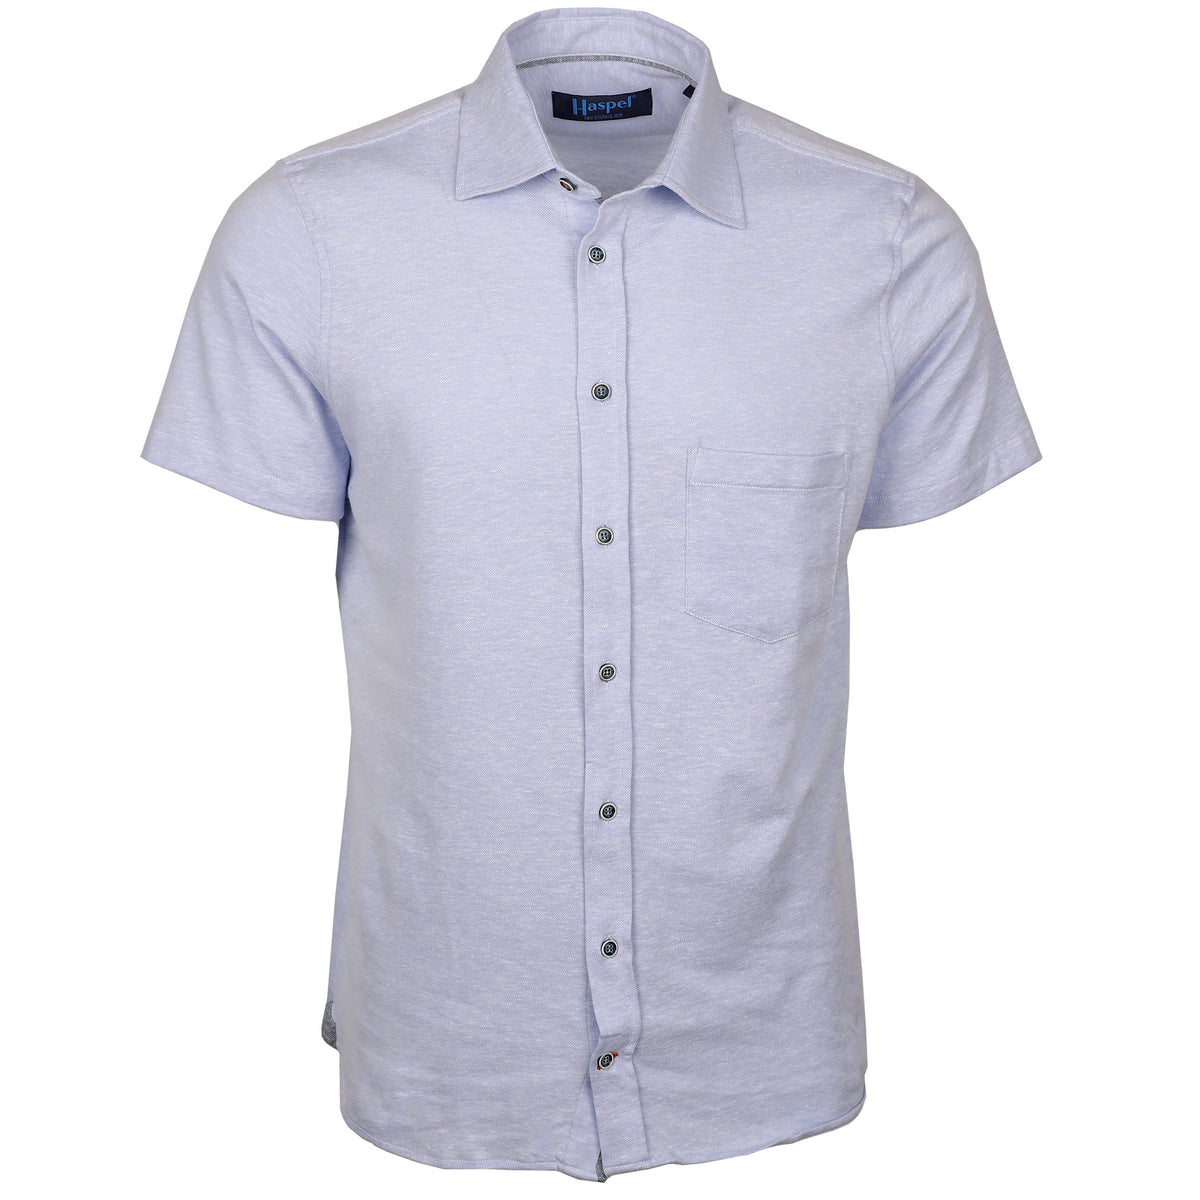 Introducing the Capri Azure Full Placket Short Sleeve Knit Shirt - designed for lasting comfort and style. Its lightweight fabric provides breathability, while the full placket offers a modern, tailored look. Versatile enough for the office or weekend, this shirt is sure to be a warm weather wardrobe staple.  100% Cotton • Full Plackett • Left Chest Pocket • Imported